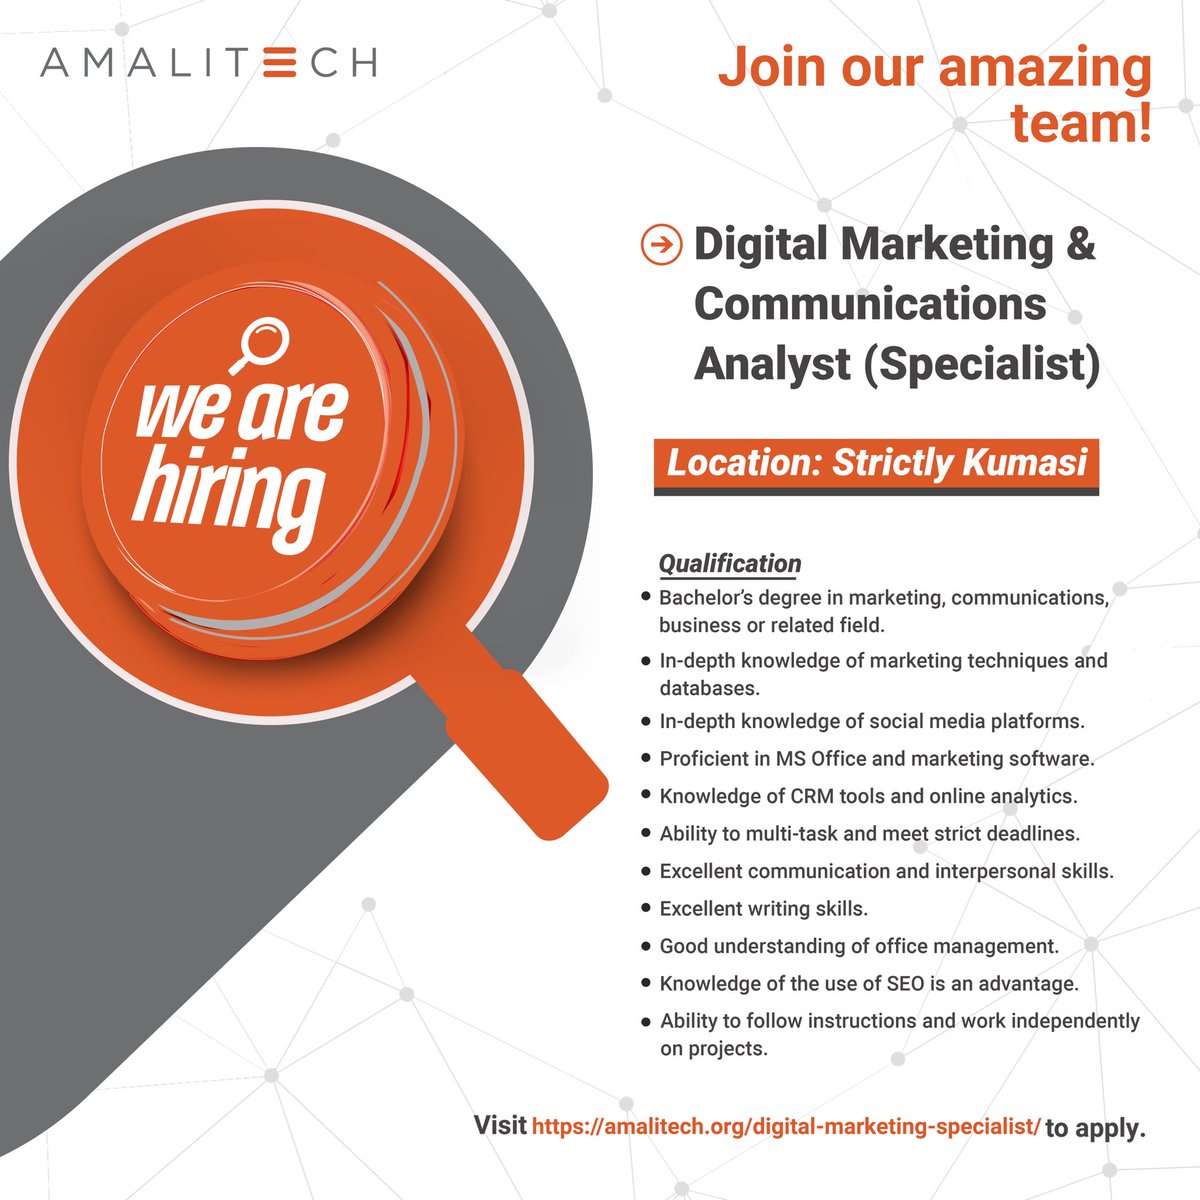 Exciting #Job Alert! We are hiring a Digital Marketing & Communications Analyst for our #Kumasi office! This role offers a dynamic work environment, excellent benefits and the chance to work with an international team. Apply now via amalitech.org/digital-market… #WorkwithAmaliTech